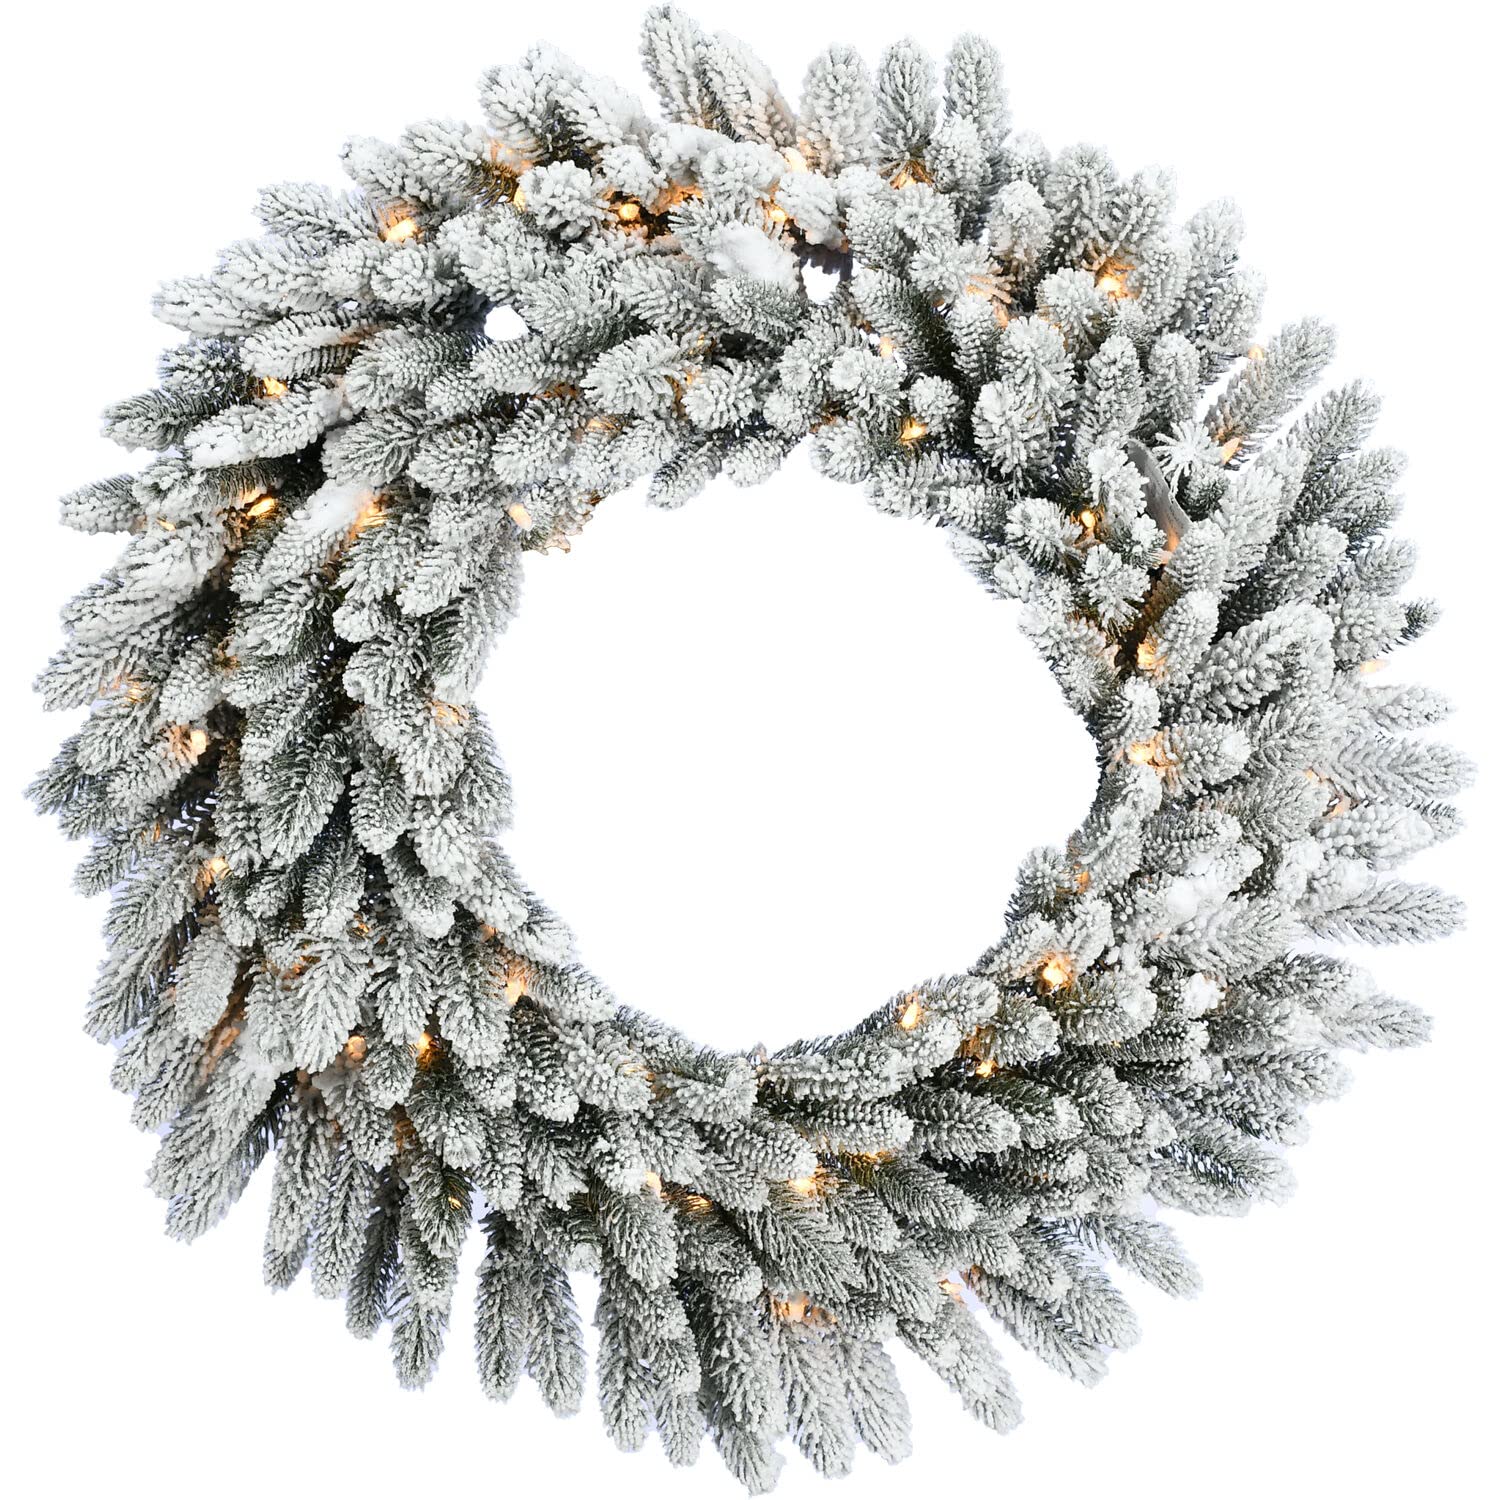 FHF 24" Icy Frost Snow Flocked Wreath, Battery Op Warm White LED Lights